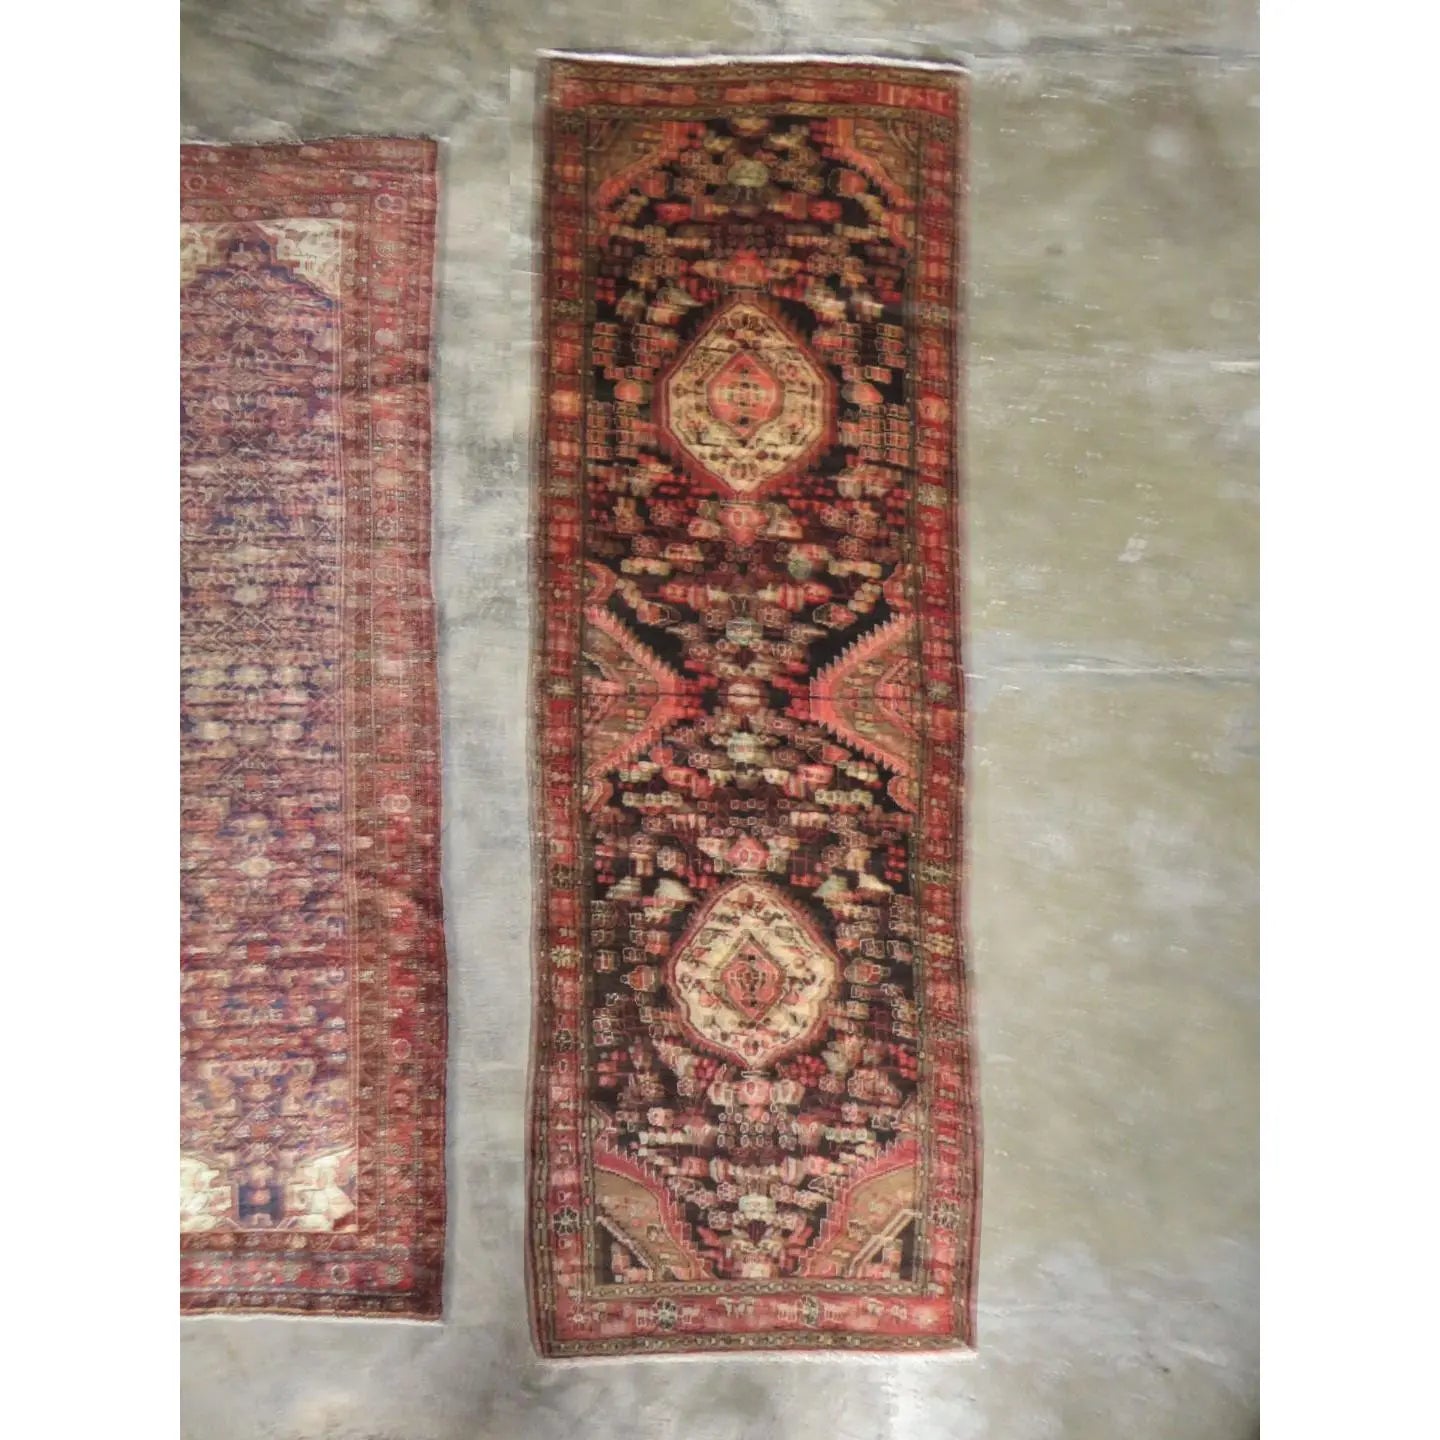 Hand-Knotted Persian Wool Rug _ Luxurious Vintage Design, 10'6" x 3'4", Artisan Crafted